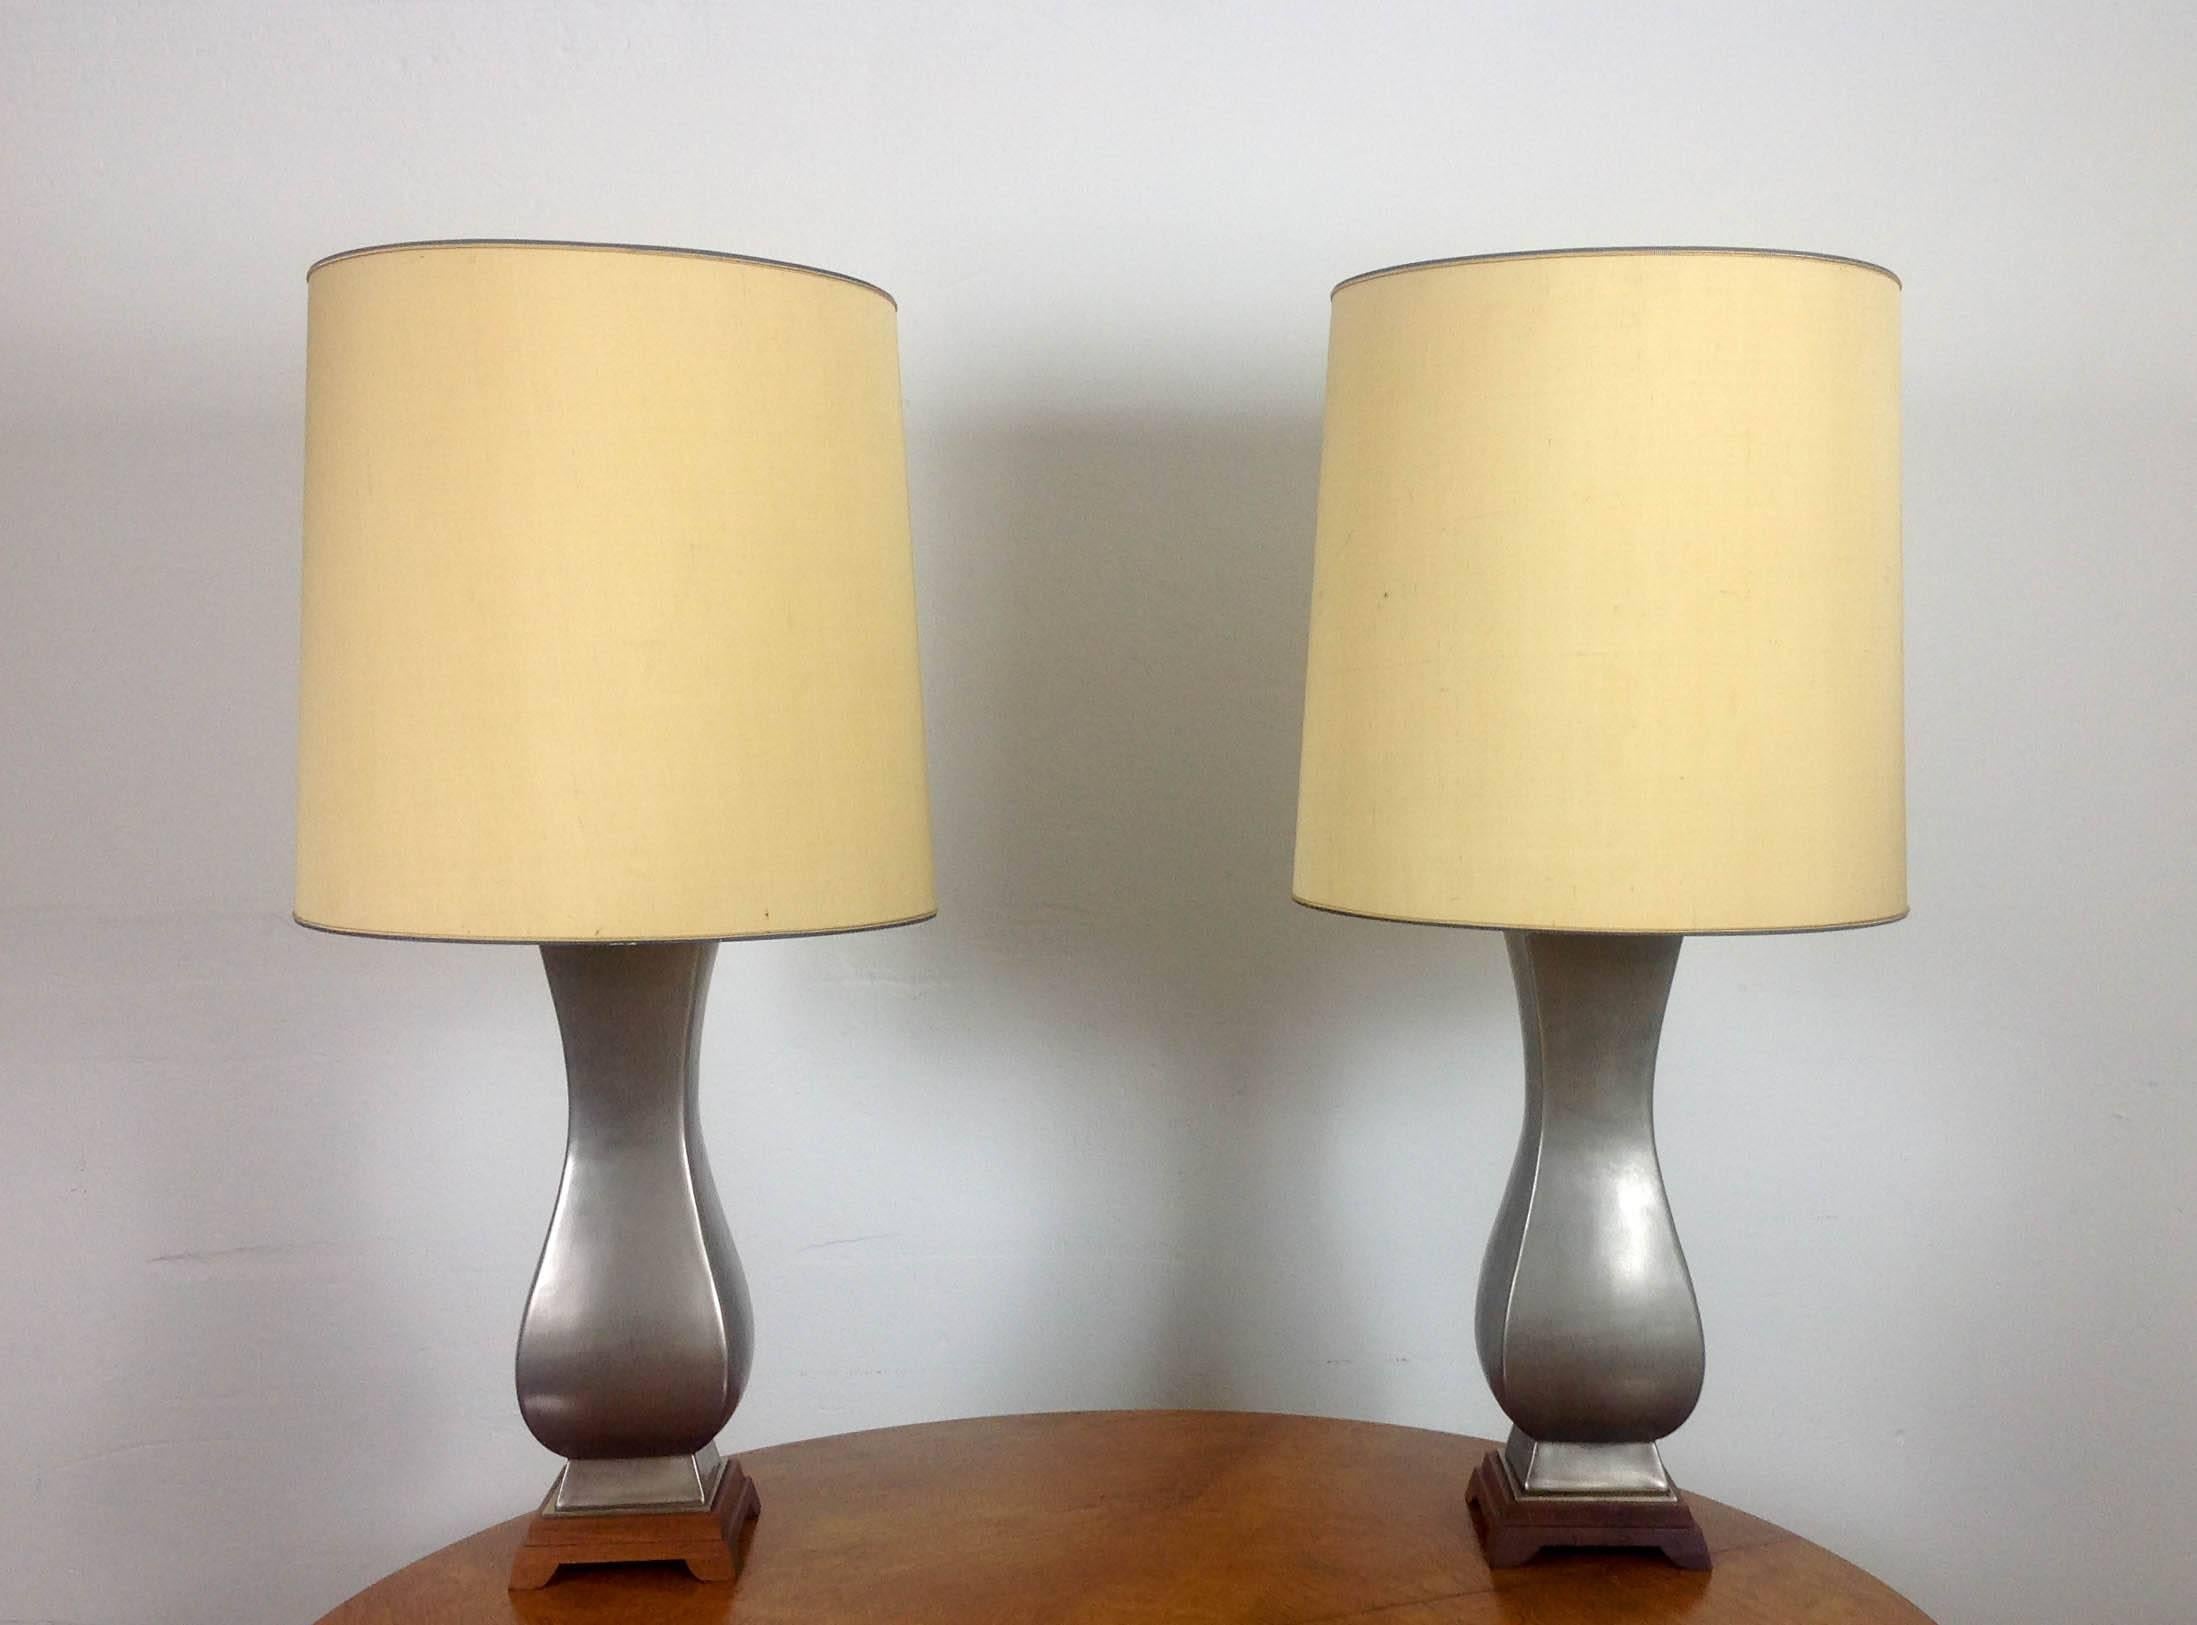 Two beautiful table lamps. Designed by Gerald Thurston for Lightolier USA, 1960s. Grey ceramic lamp bases with a metallic finish on oak feet. Triple armatures which can be switched on and off individually using the draw cord. 

The lamp bases are